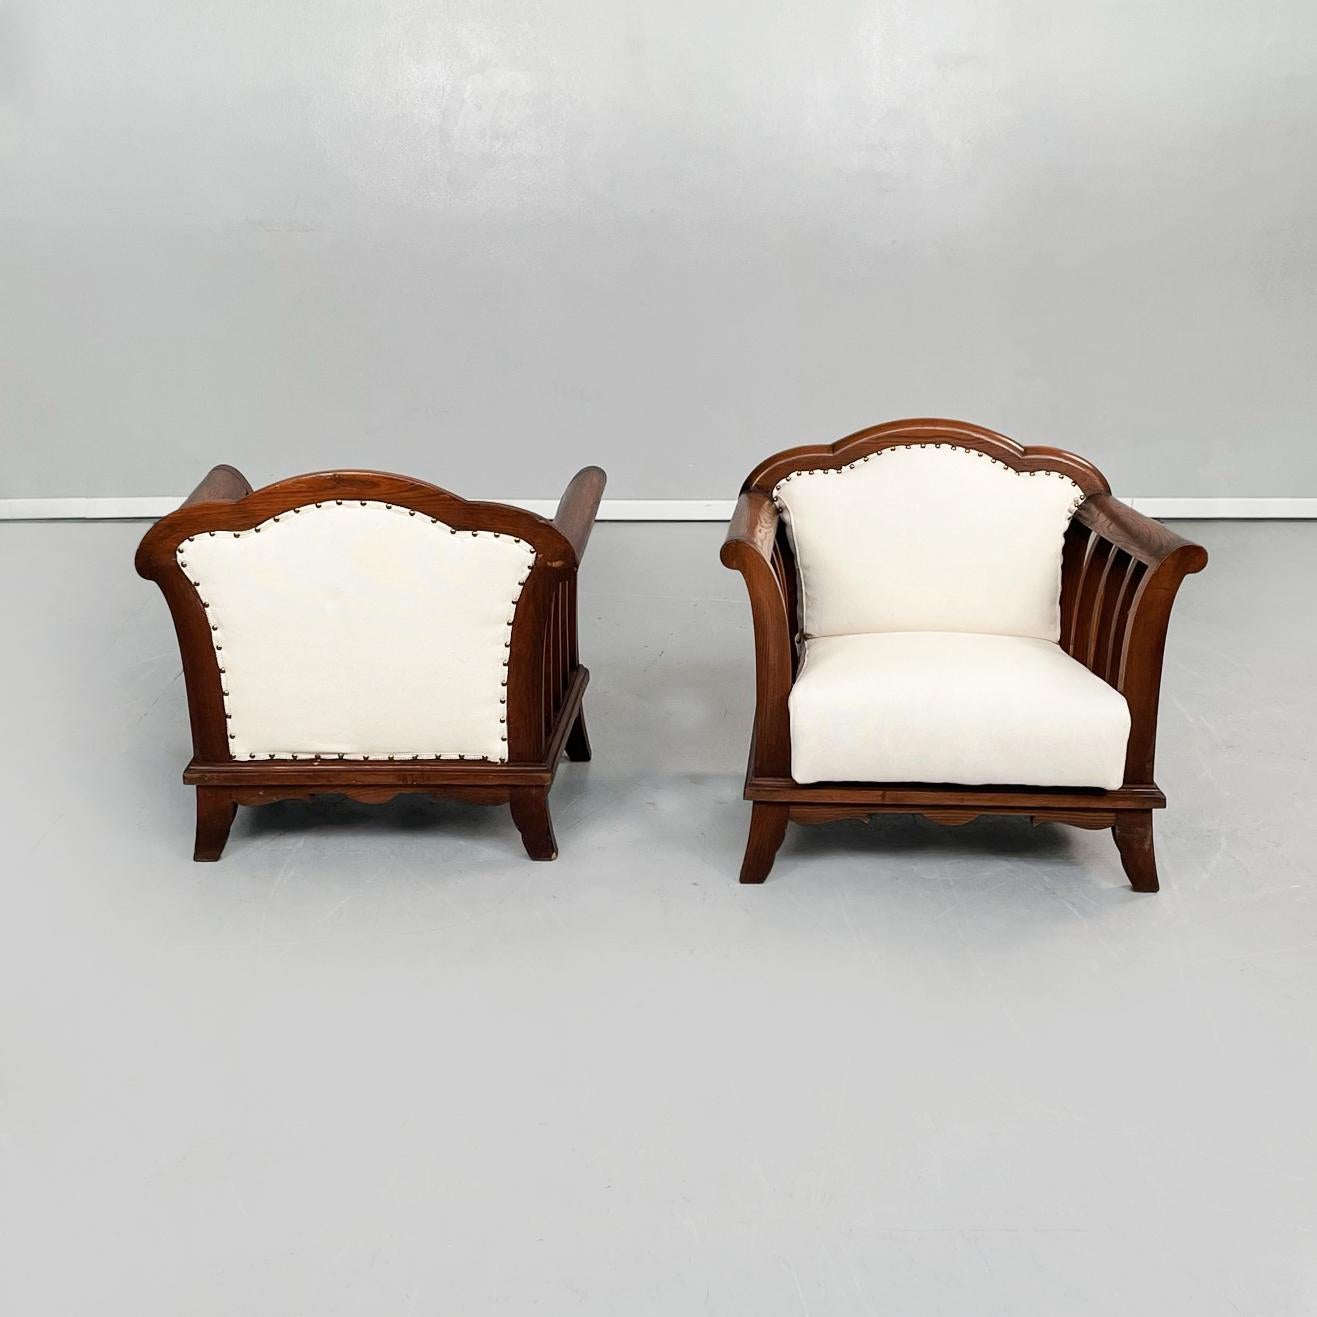 Italian modern wooden armchairs with white fabric, 1940s
Set of 2 armchairs with wooden structure. The armchair has a square seat and a square backrest with 3 semicircles on the top, both padded and upholstered in white fabric with exposed